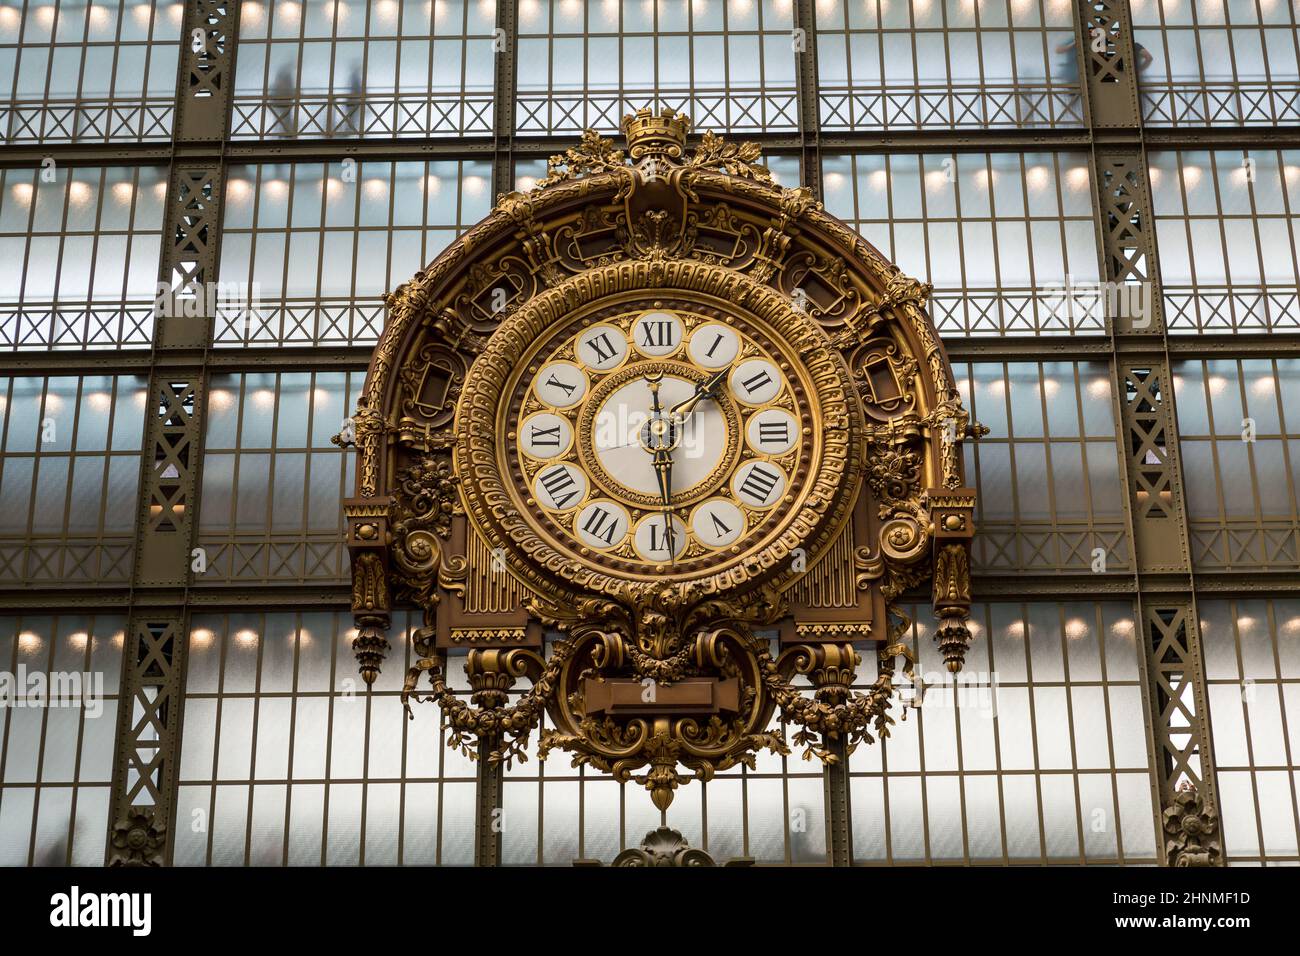 PARIS -SEPTEMBER 7, 2014: Golden clock of the museum D'Orsay in Paris, France. Musee d'Orsay has the largest collection of impressionist and post-impressionist paintings in the world. Stock Photo